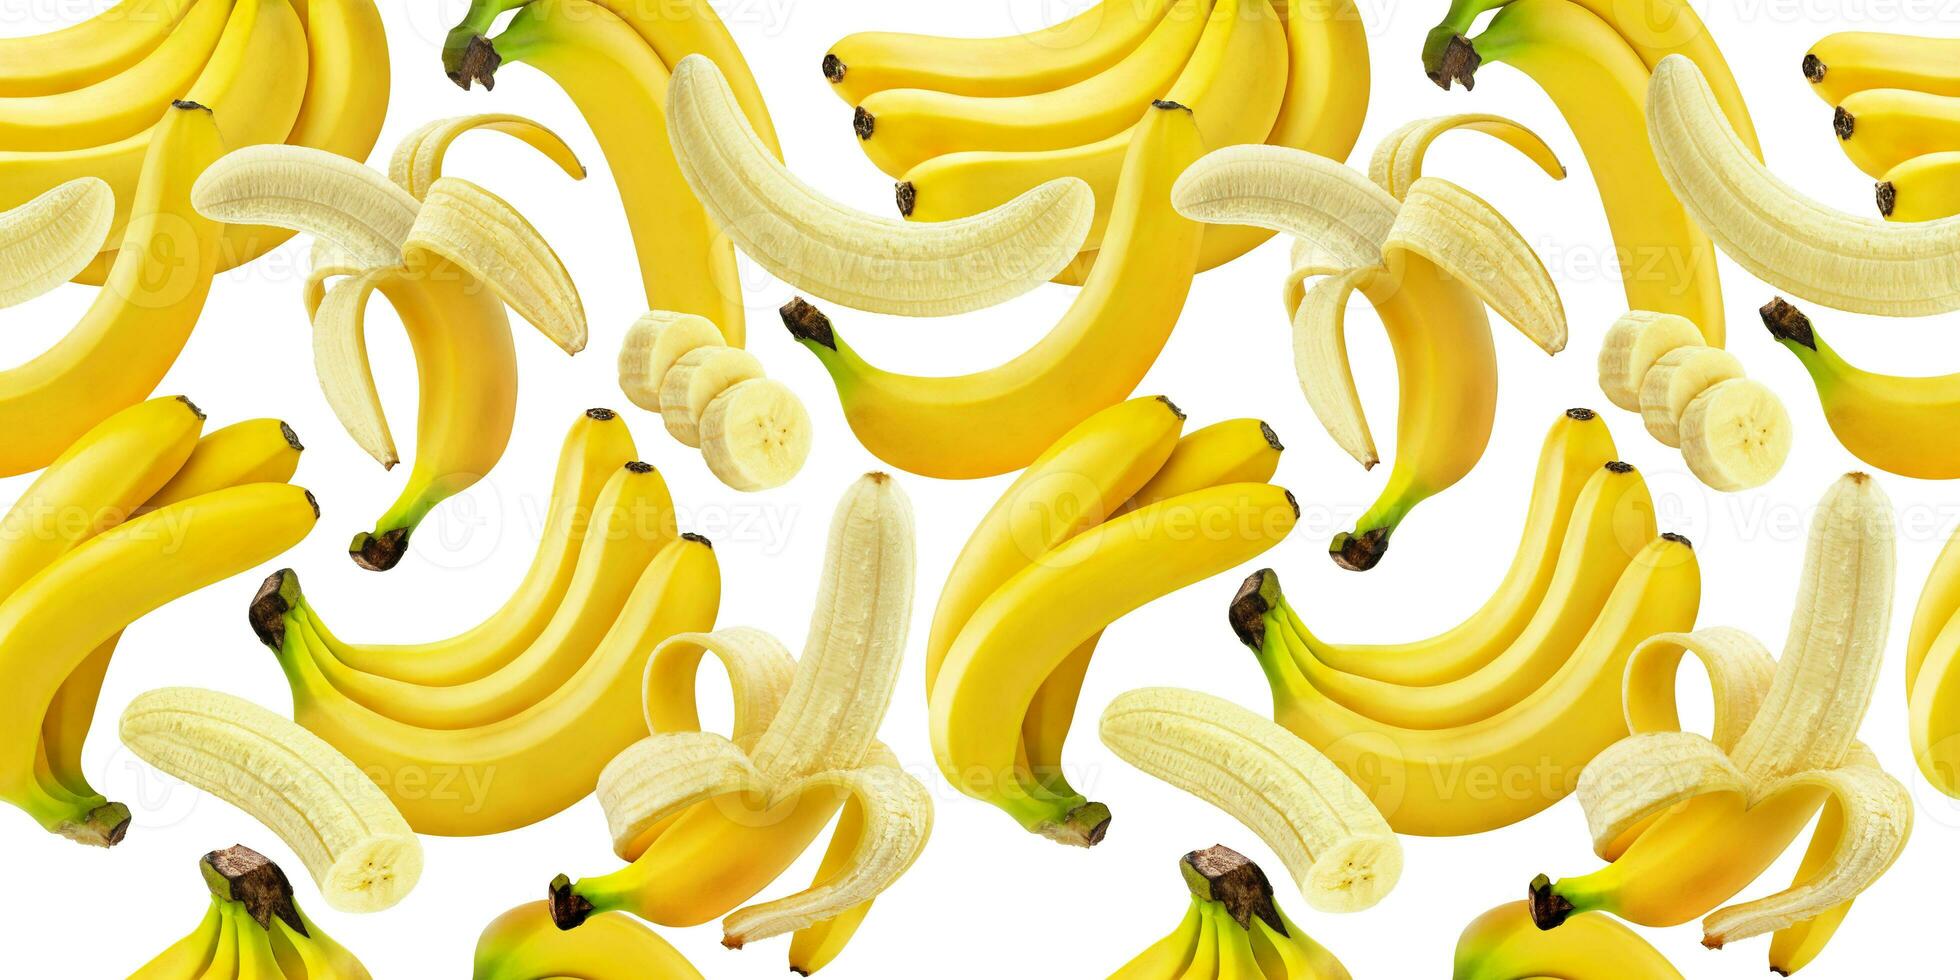 Banana seamless pattern, falling bananas isolated on white background with clipping path photo